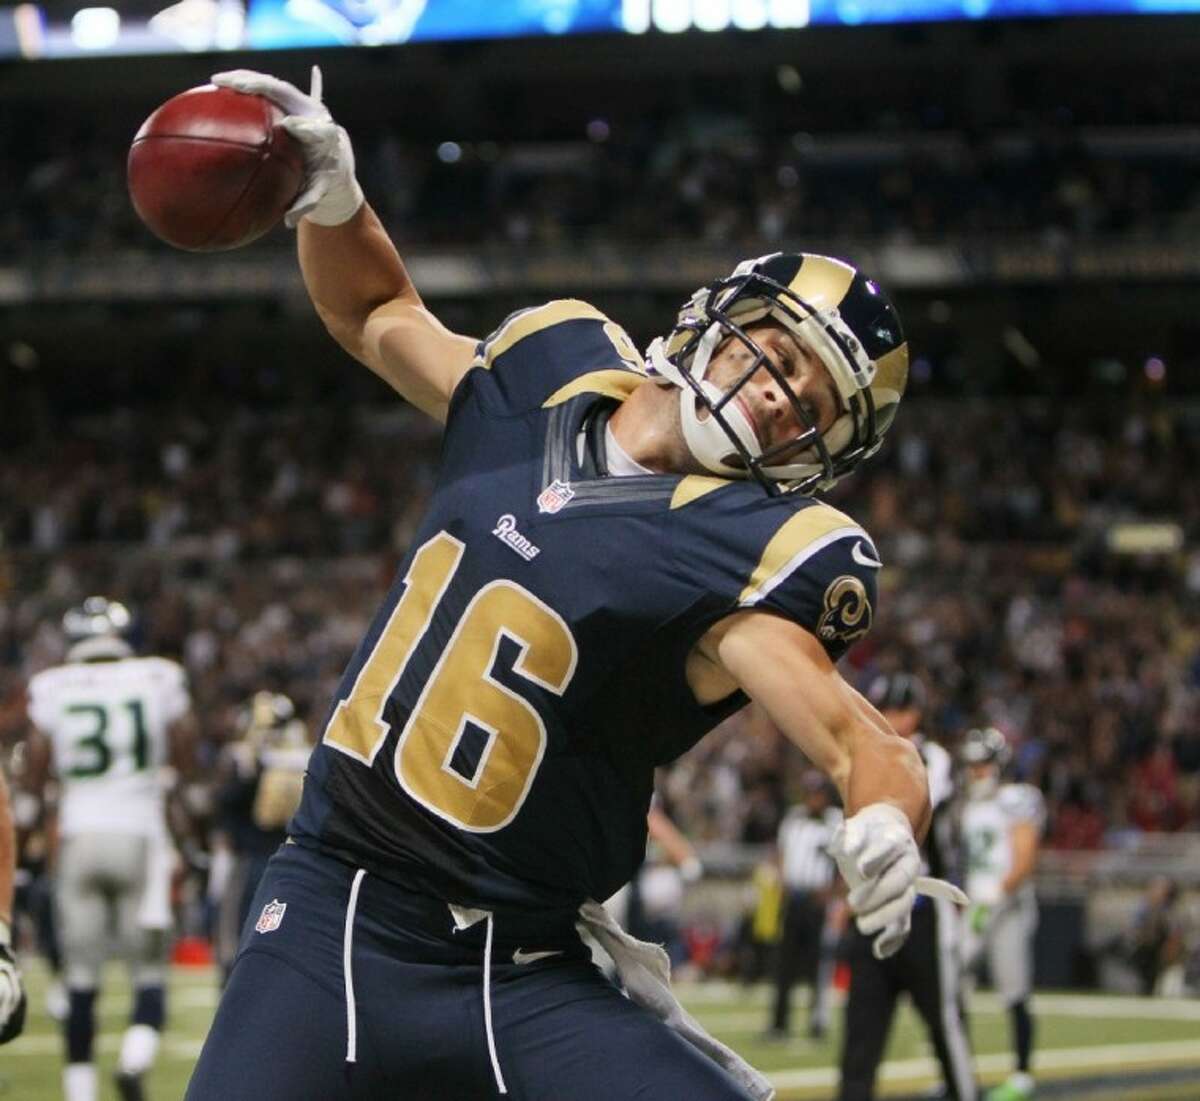 Rams receiver Danny Amendola, who played high school ball at The Woodlands, spikes the ball after scoring on a pass on a fake field-goal play.